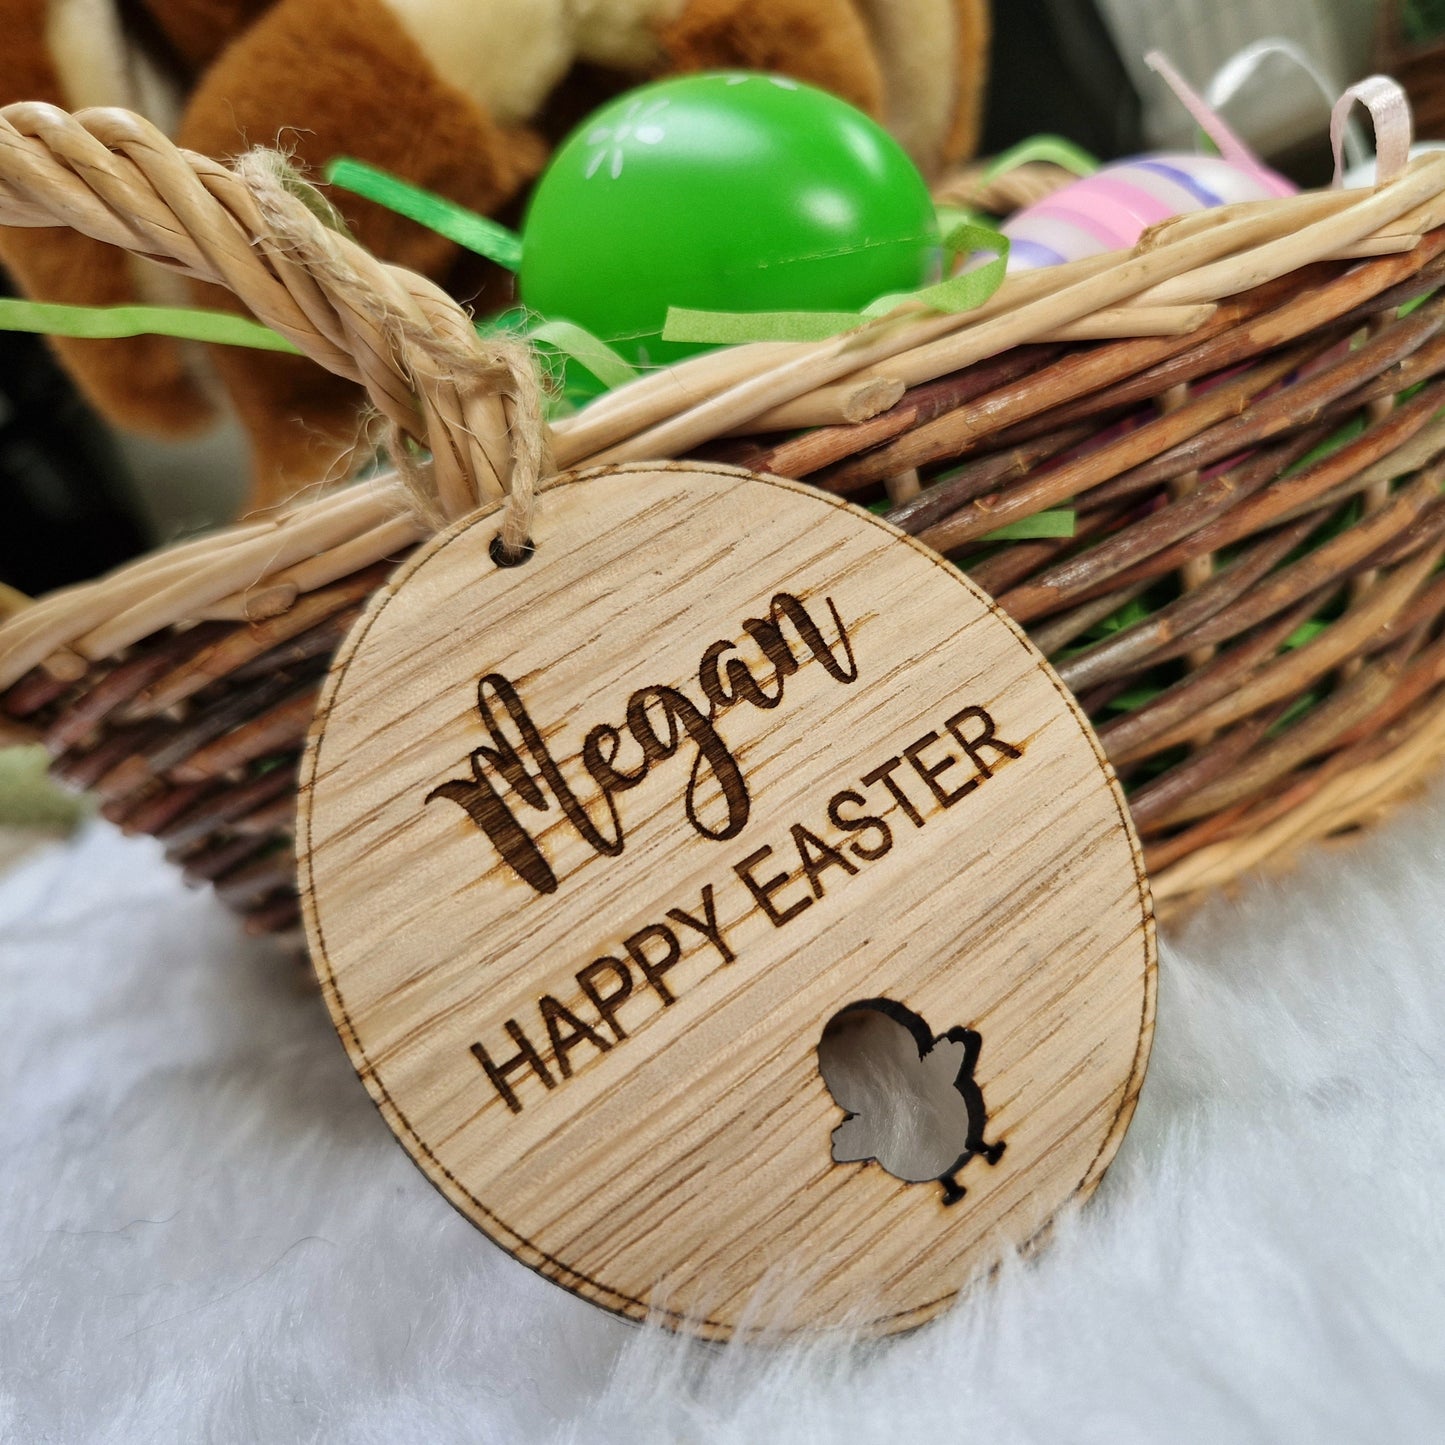 Happy Easter Personalised Wooden Egg Tag